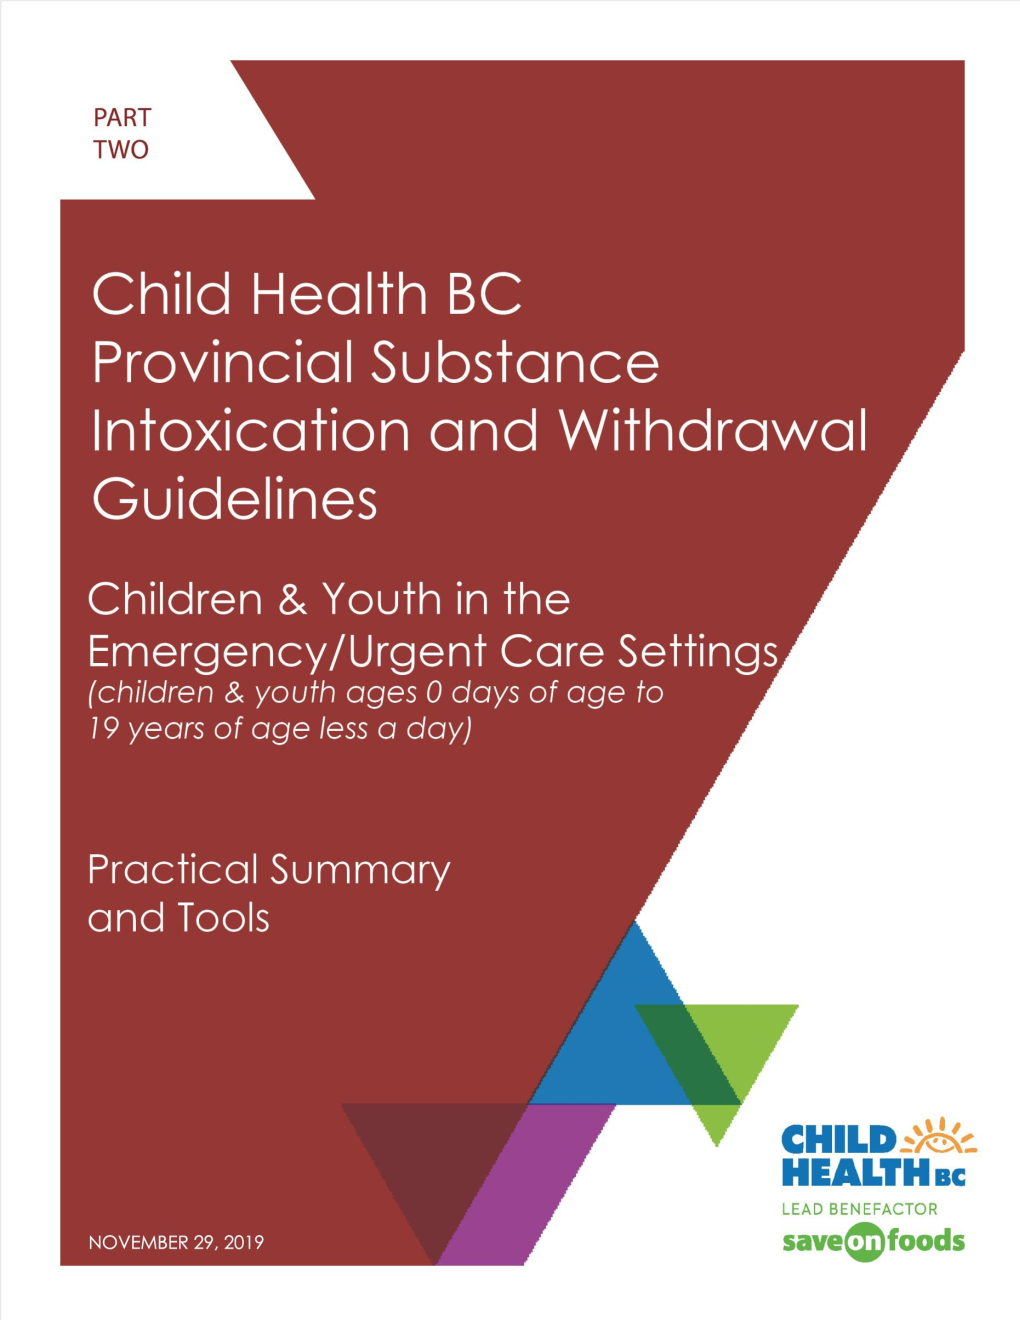 Child Health BC Provincial Substance Intoxication and Withdrawal